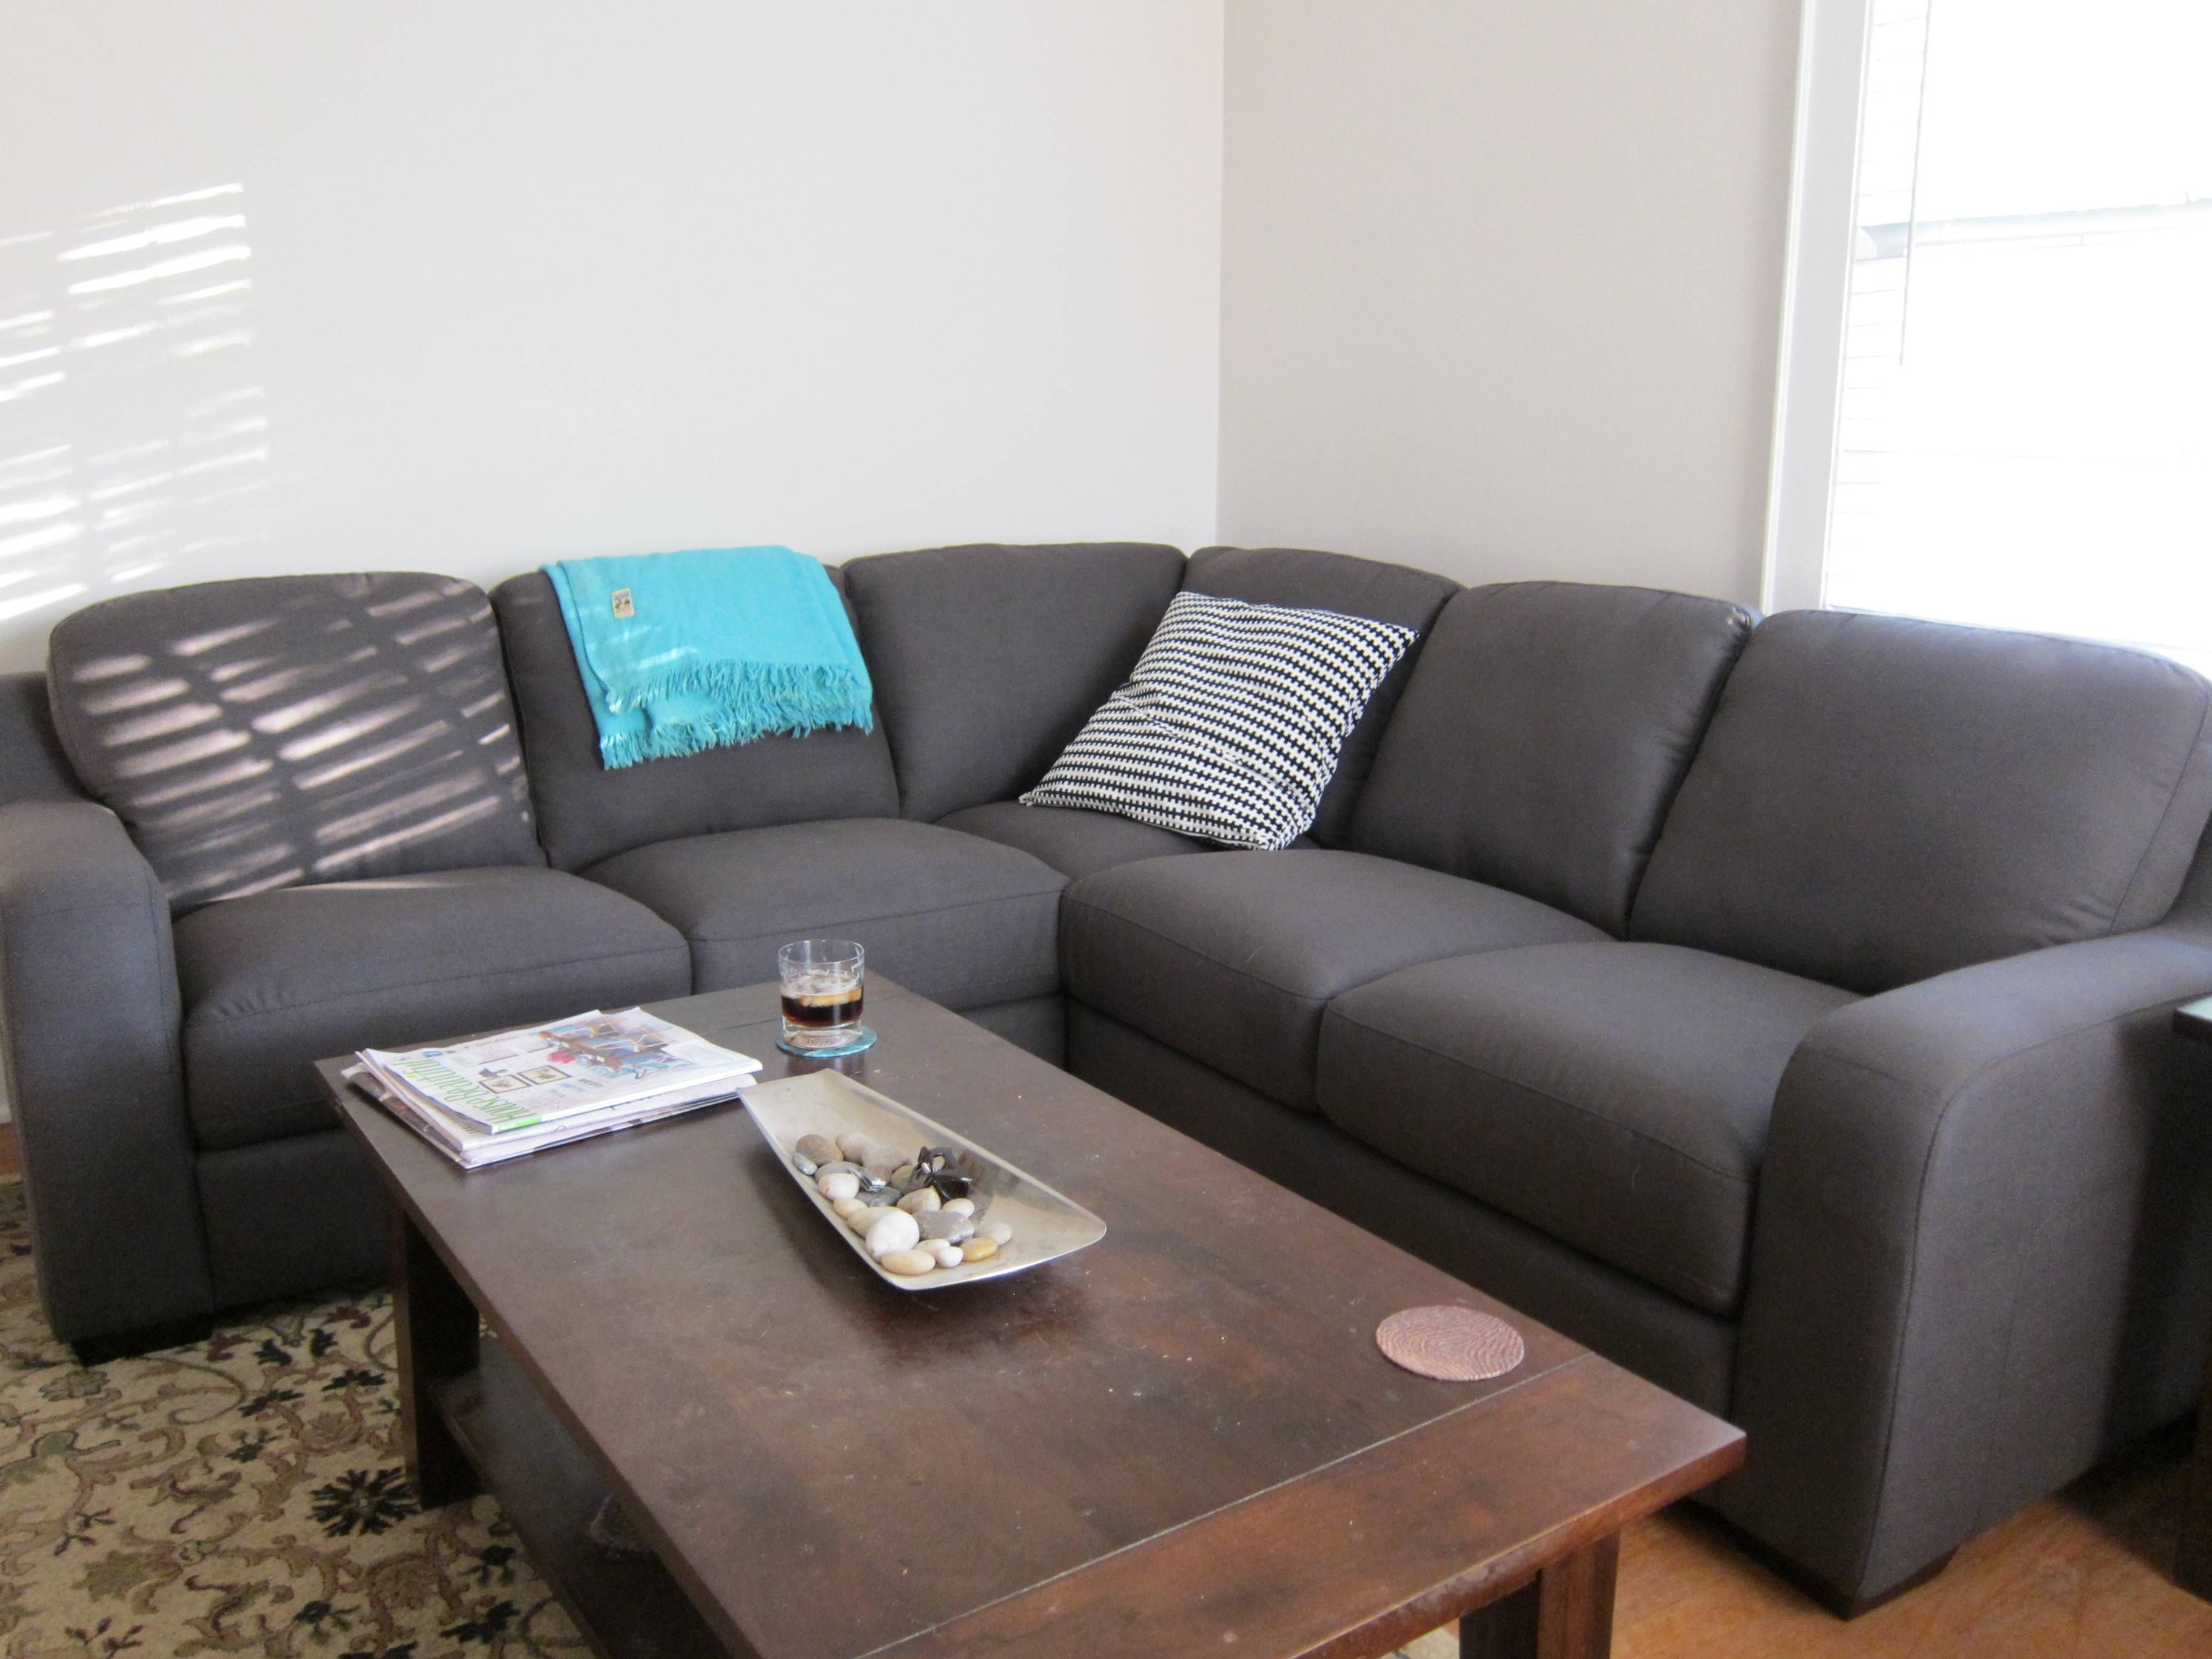 Sectional Sofa, In Reality | Escape From Bk Regarding Short Sectional Sofas (View 3 of 15)